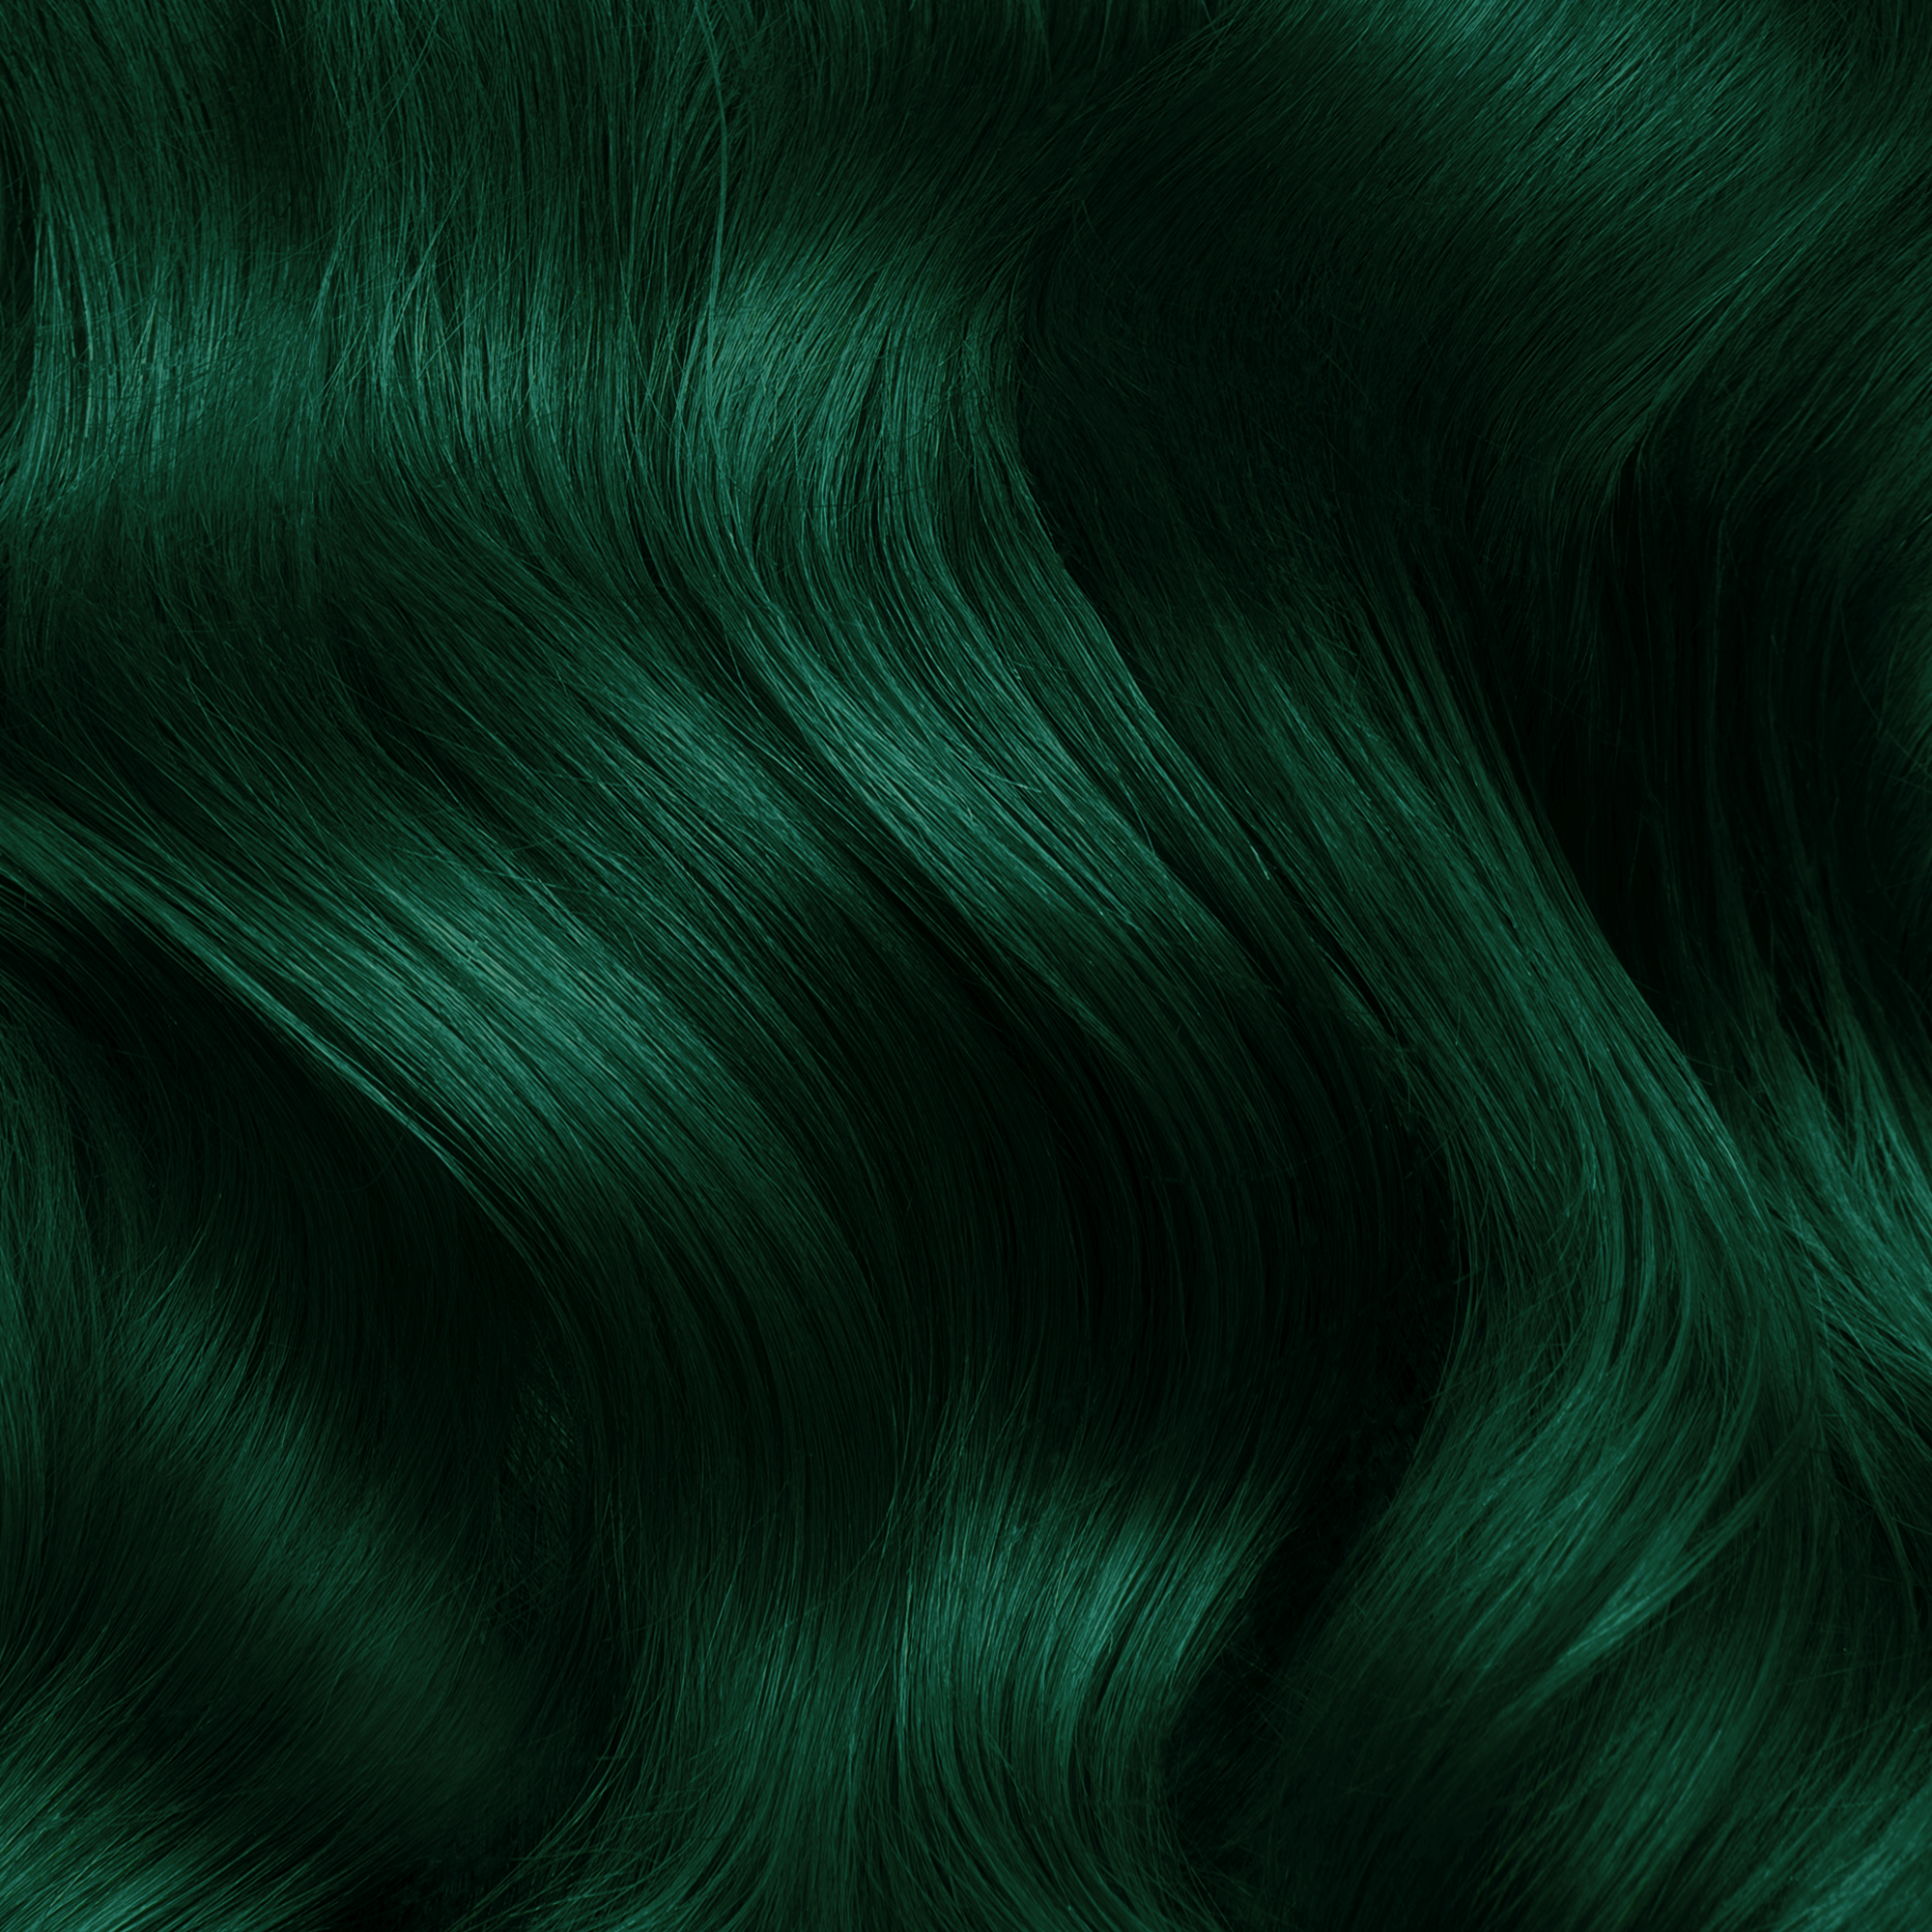 Colorist Created Aurora Australis Hair With Blue, Green, and Yellow Hair Dye  — See Photo | Allure